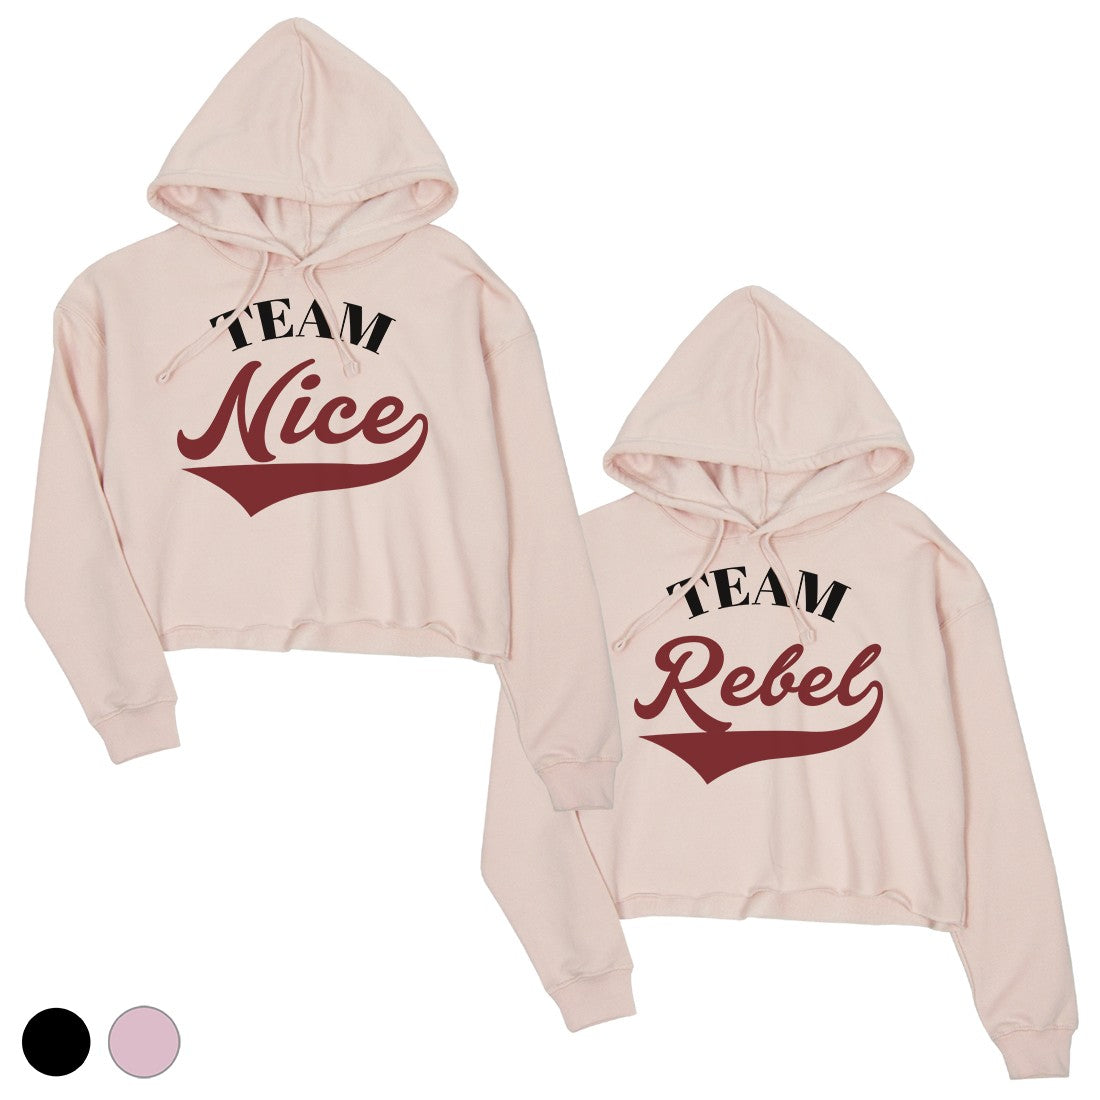 Team Nice Team Rebel Bff Matching Crop Hoodies For Christmas Gift 365 In Love Matching Gifts Ideas